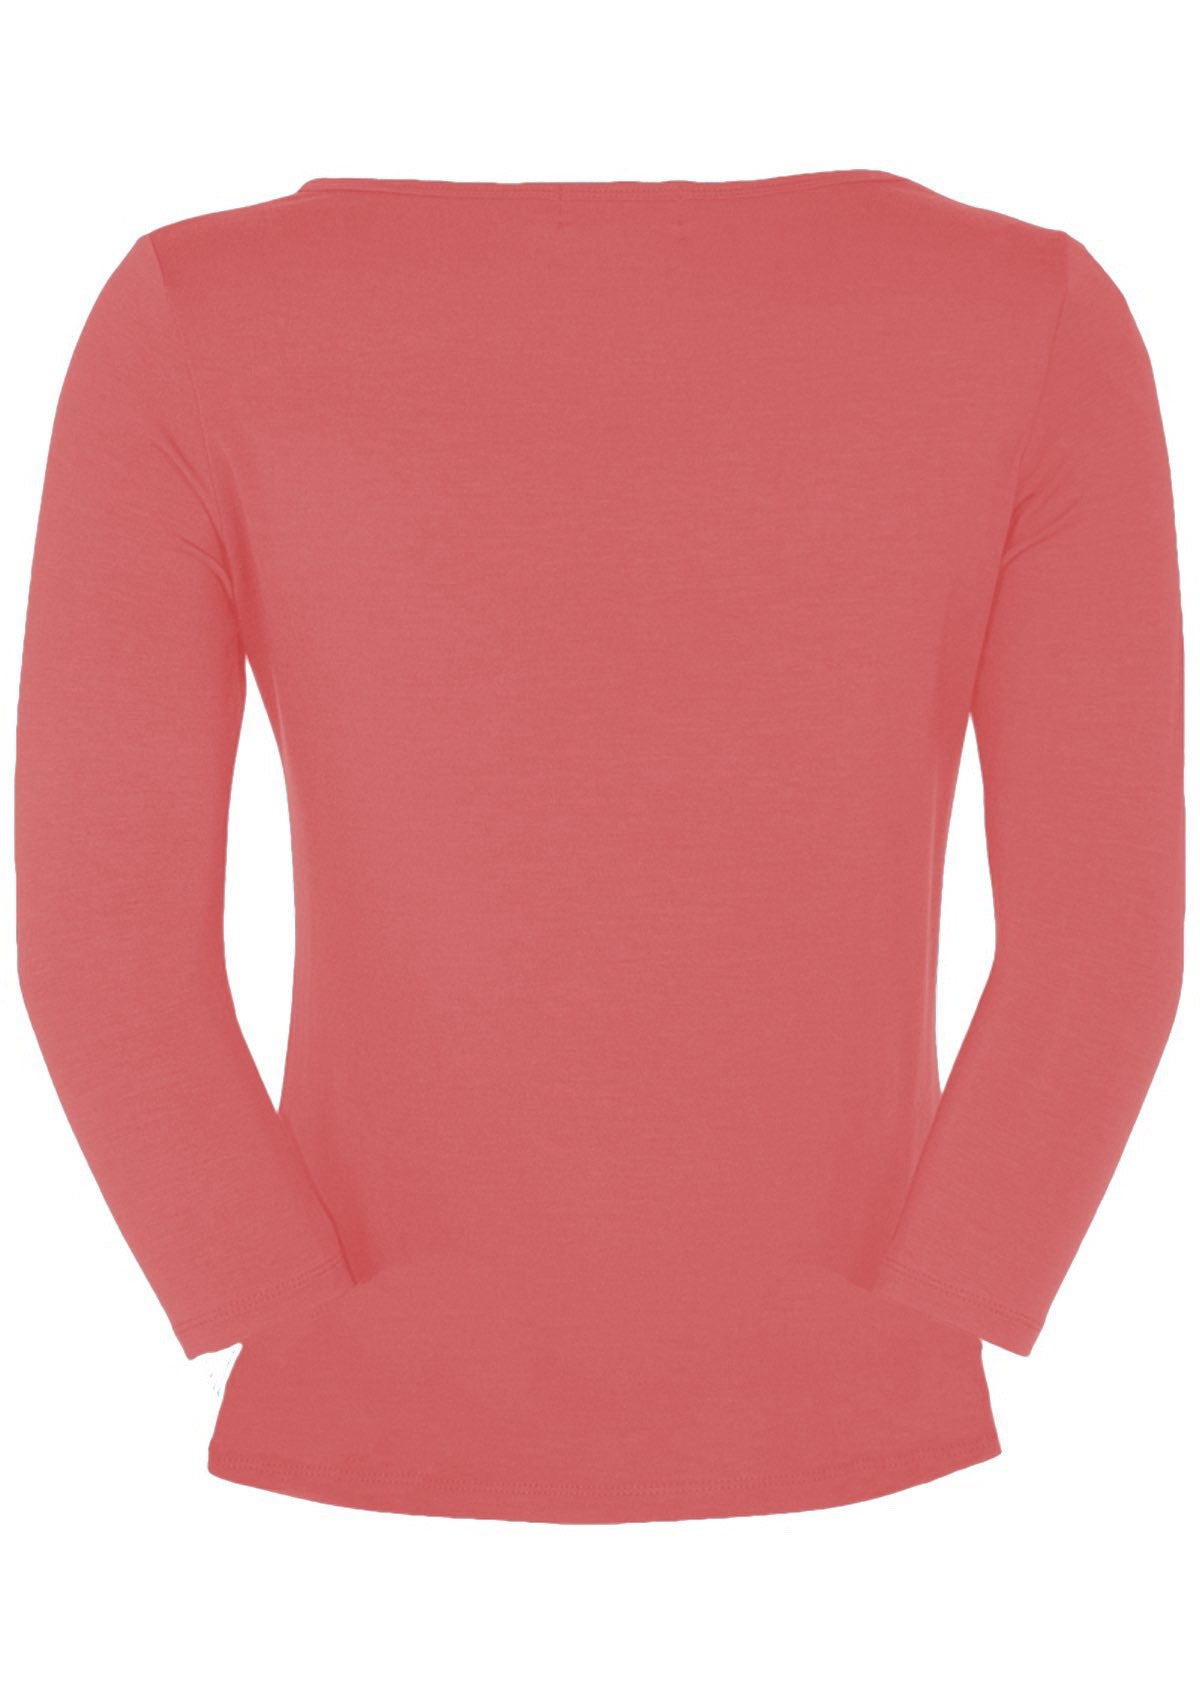 Back view of women's rayon boat neck pink 3/4 sleeve top.